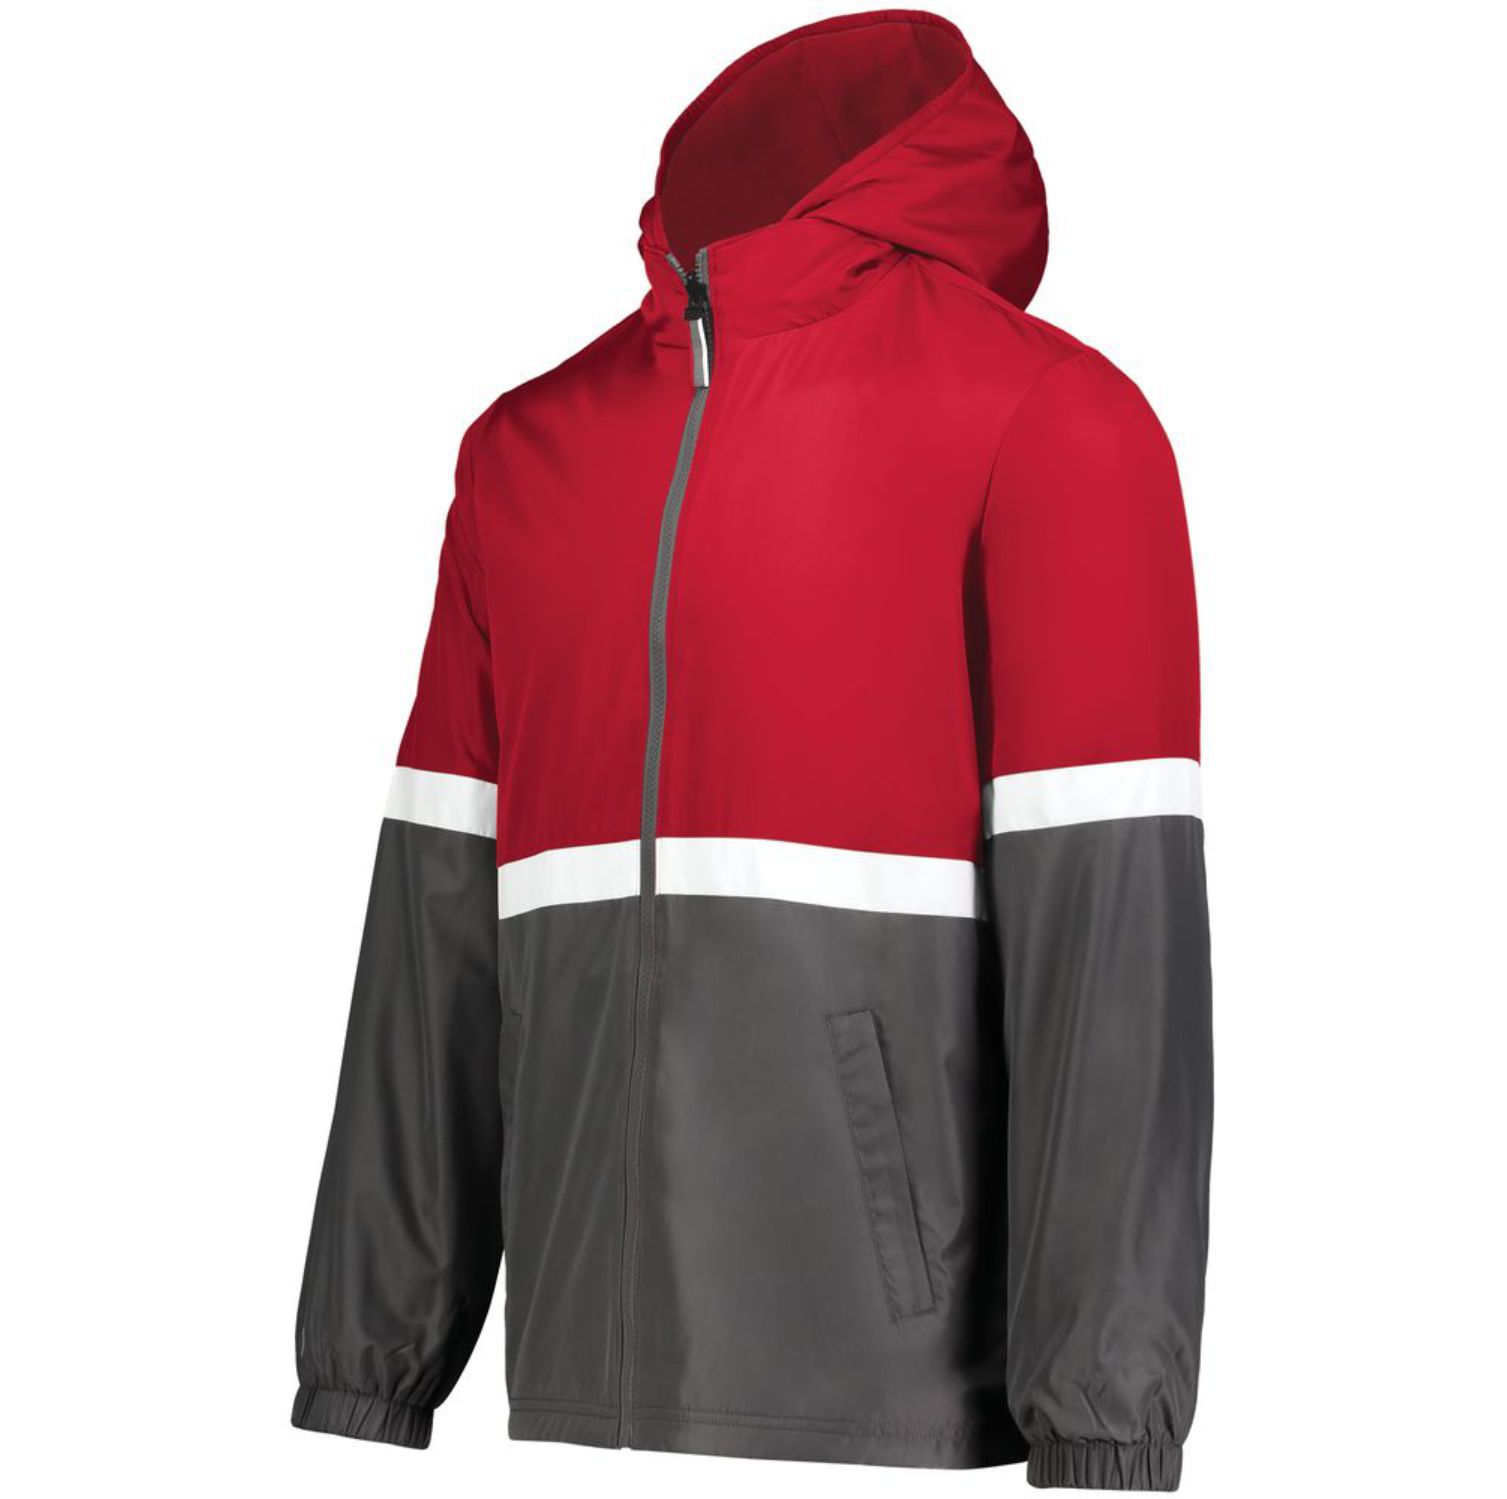 Holloway Turnabout Reversible Jacket #229587 Scarlet / Carbon